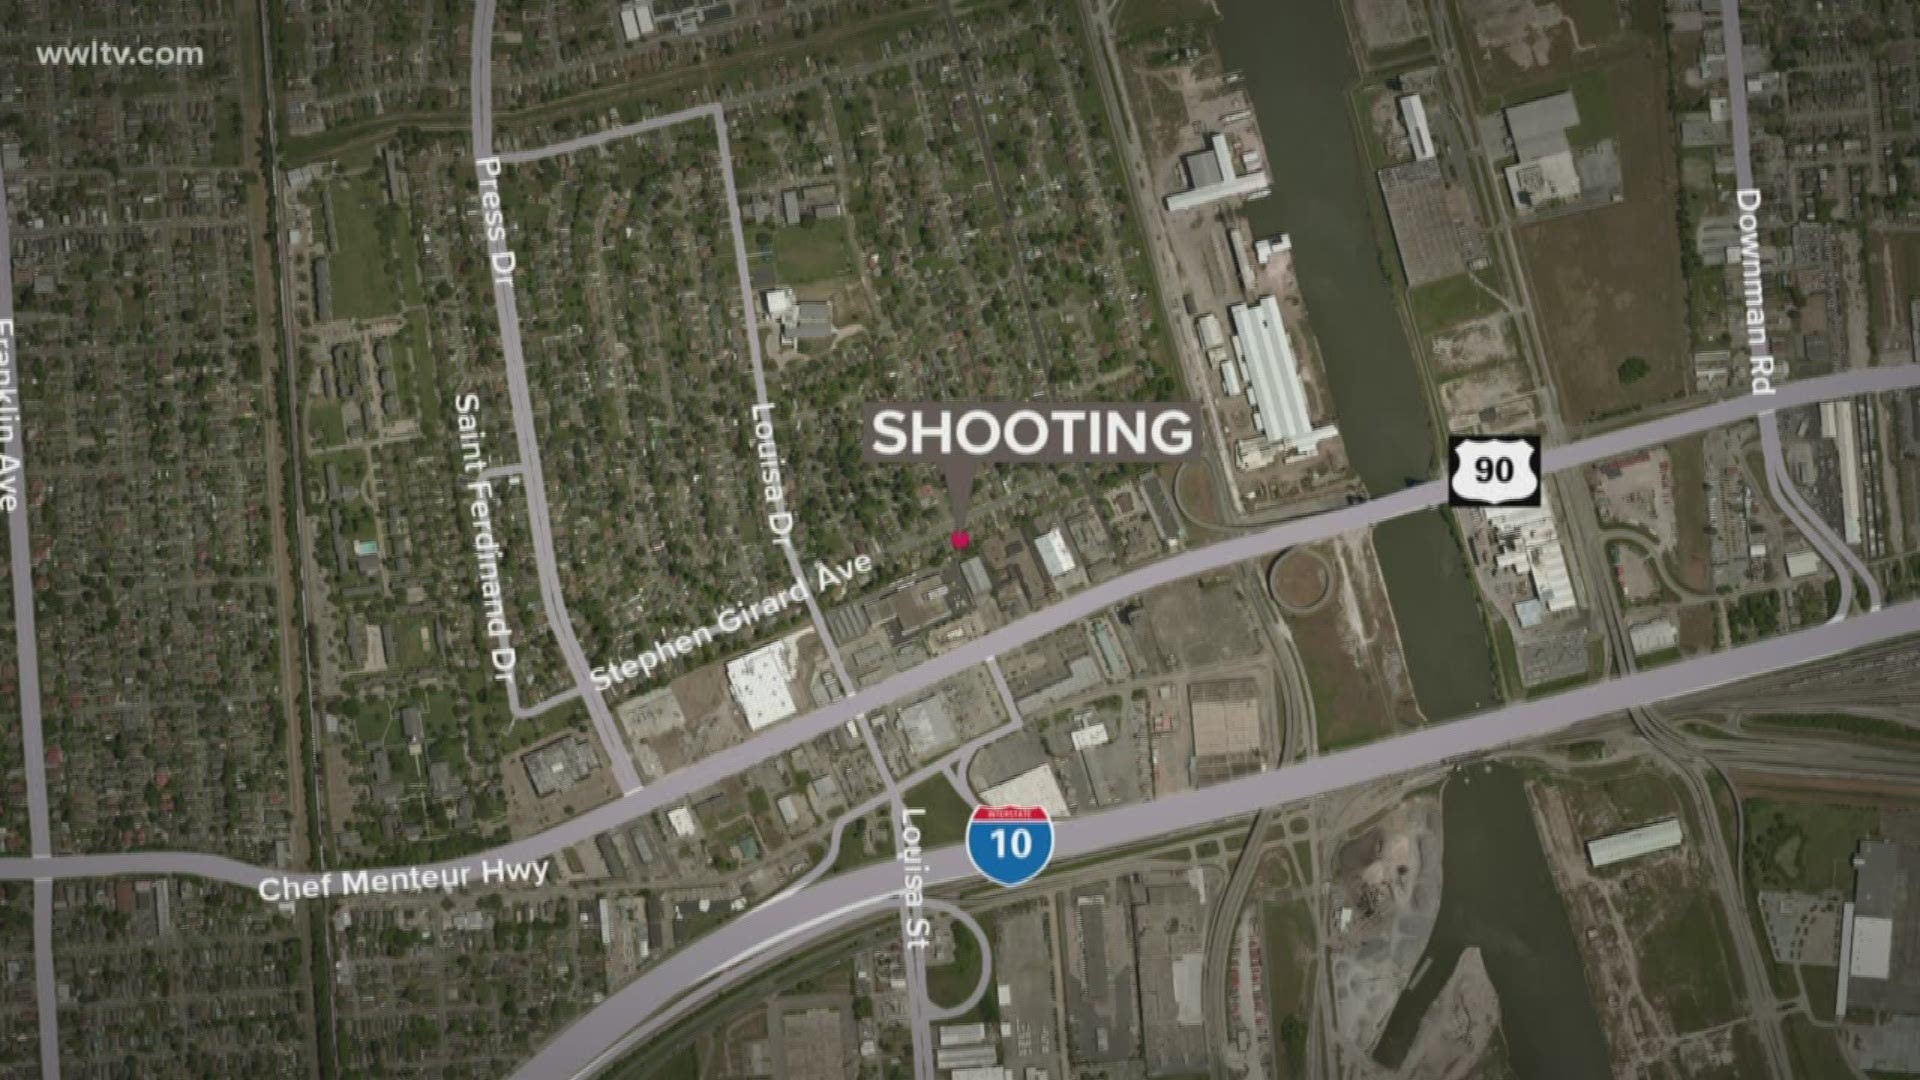 The shooting happened early Saturday morning, police say.